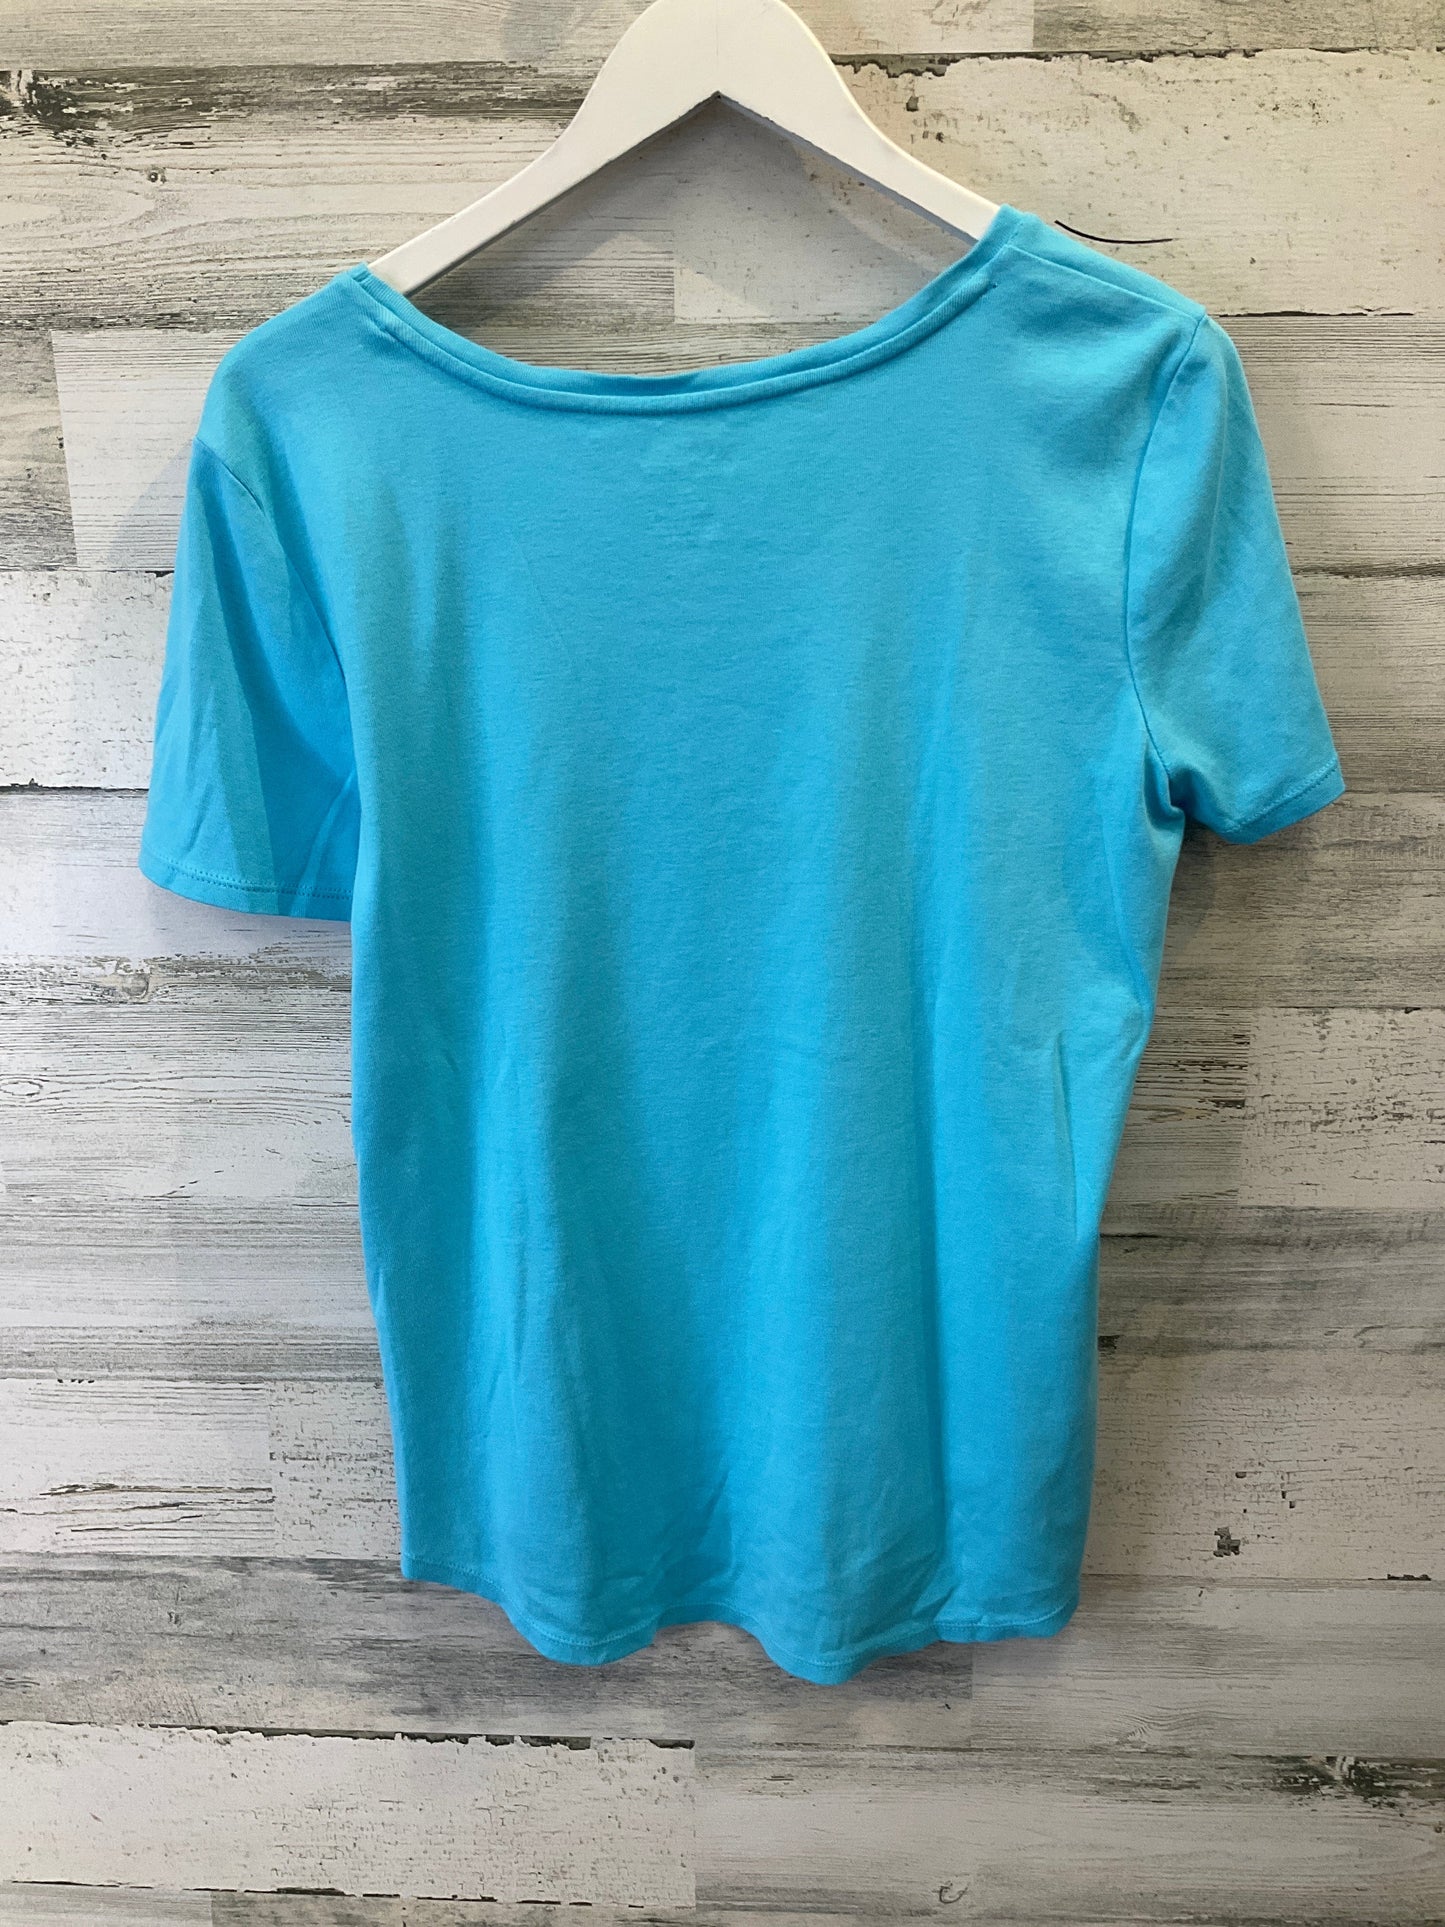 Blue Top Short Sleeve Basic Chicos, Size L